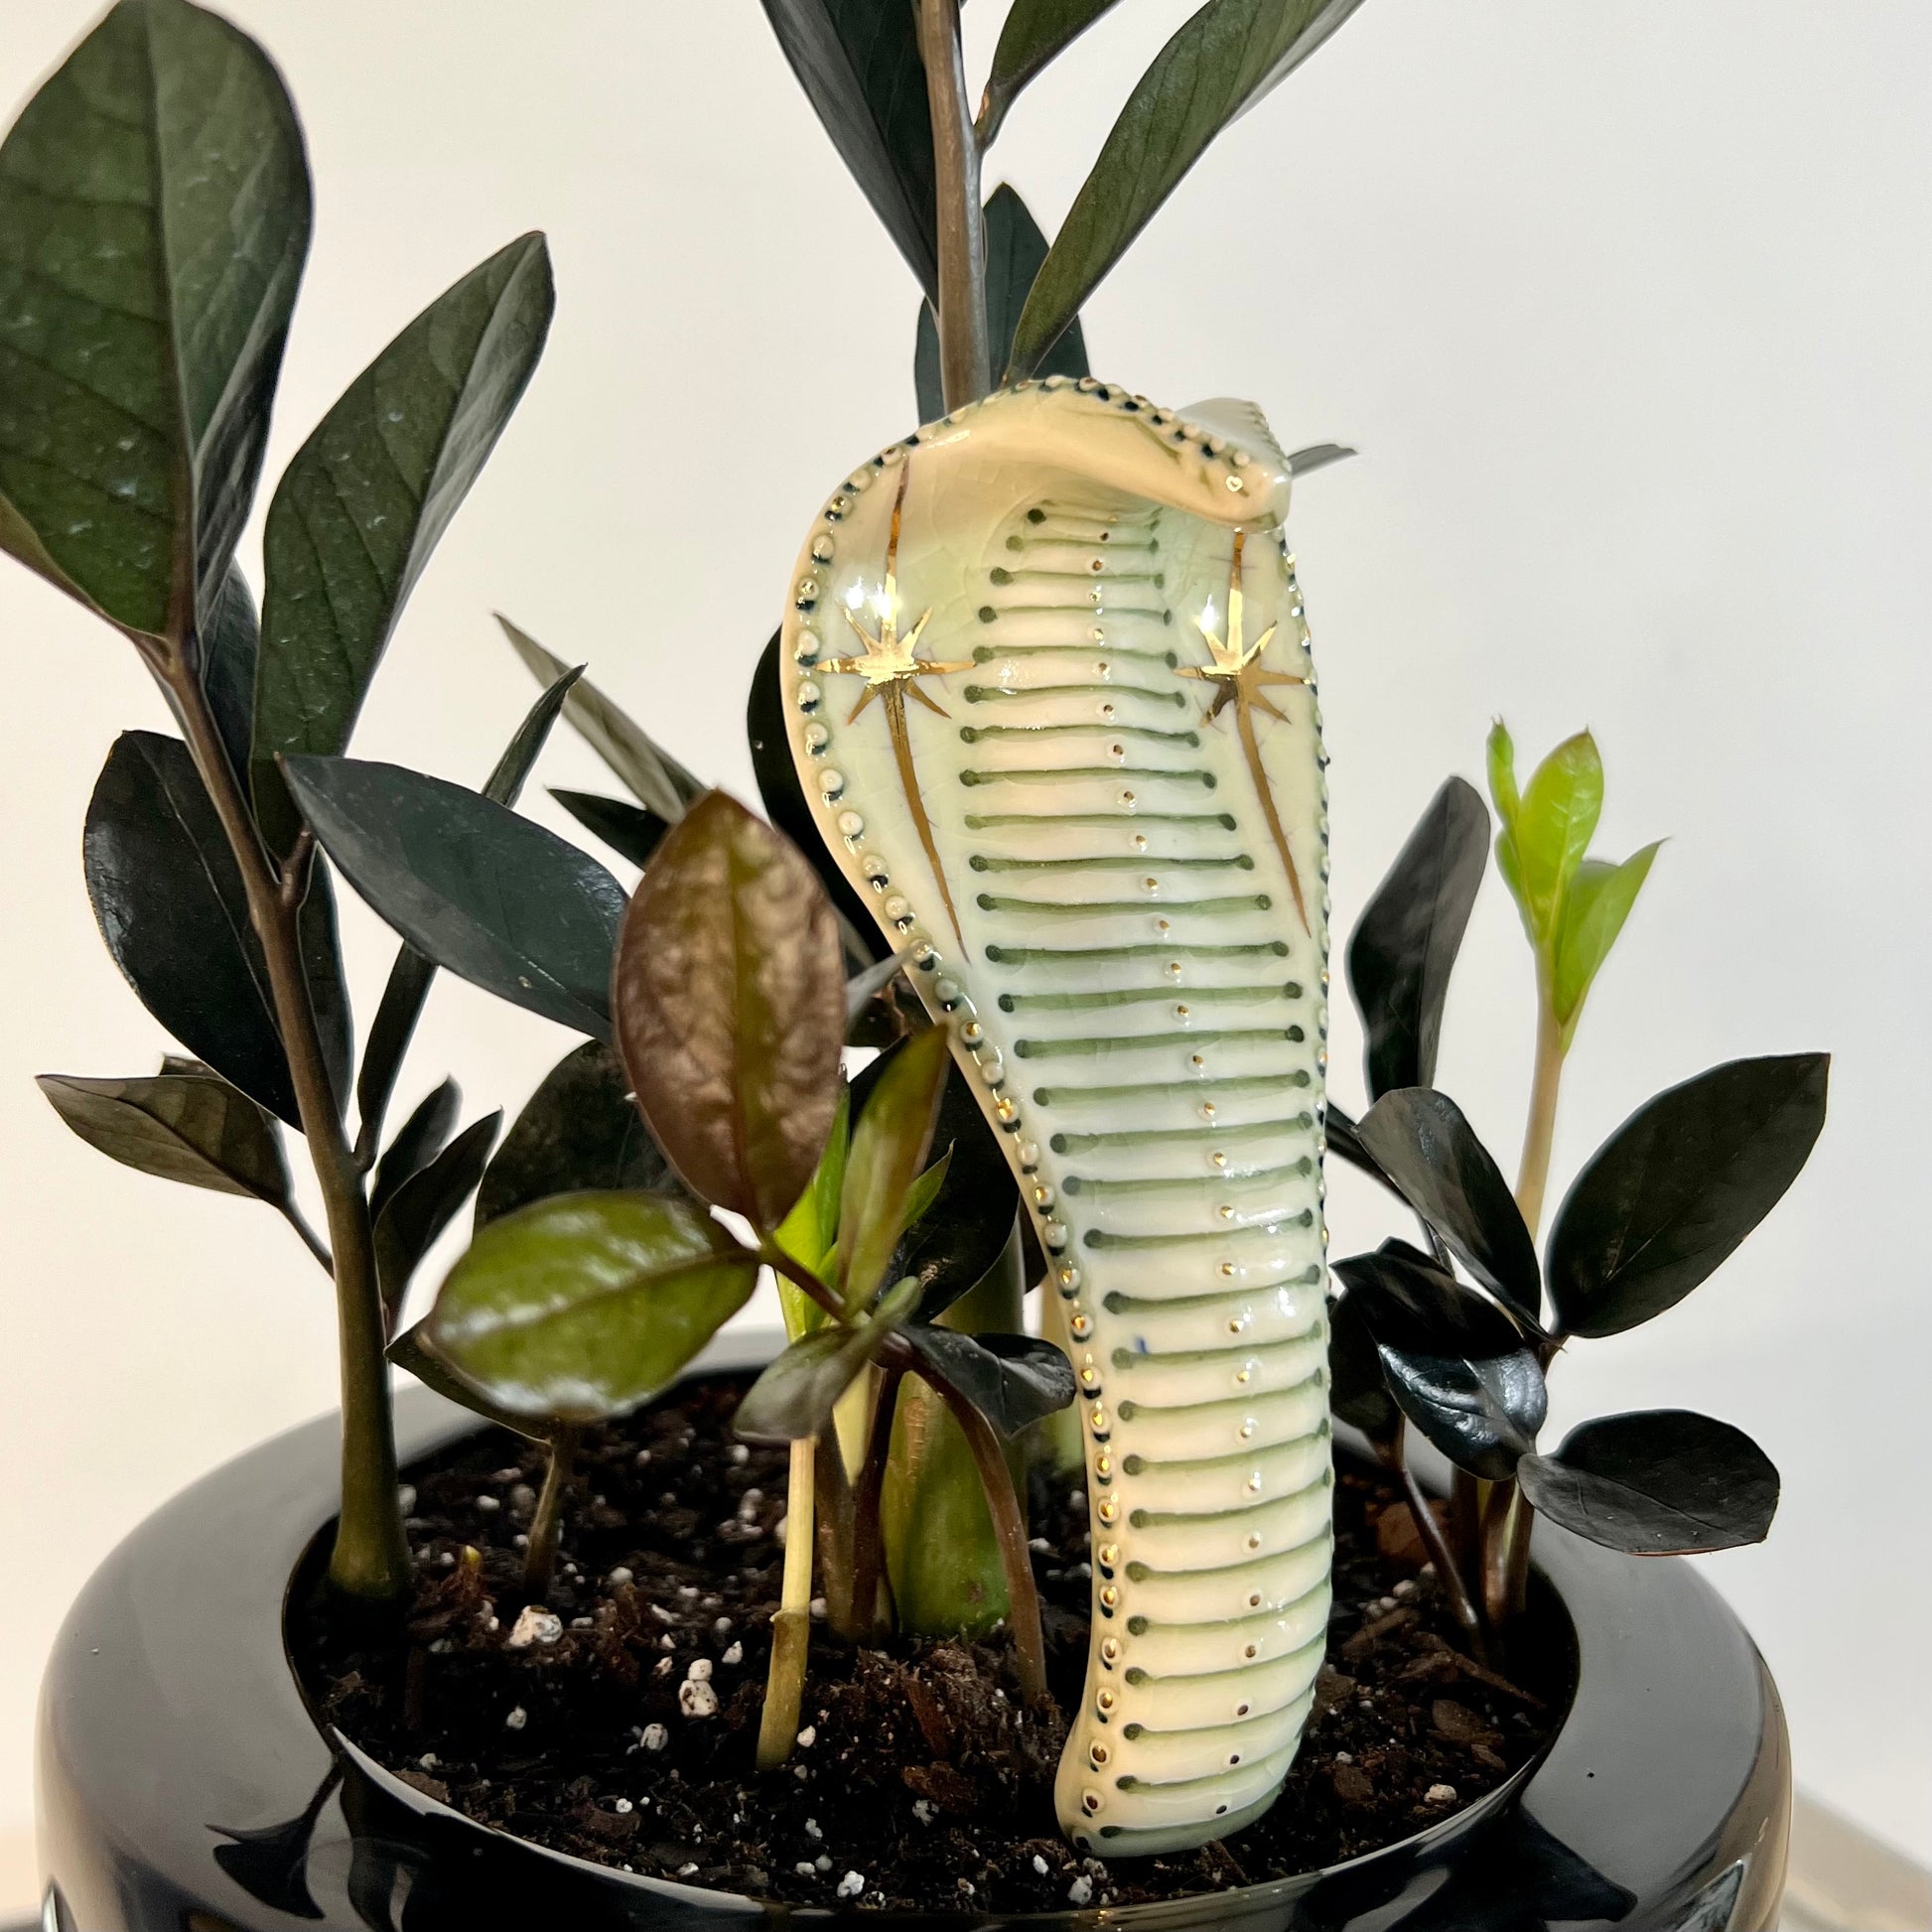 Product Image: Planter Snake 5 - Hand crafted Porcelain Home Ornament. Snake with Brass Rod for placing in pots with plants.